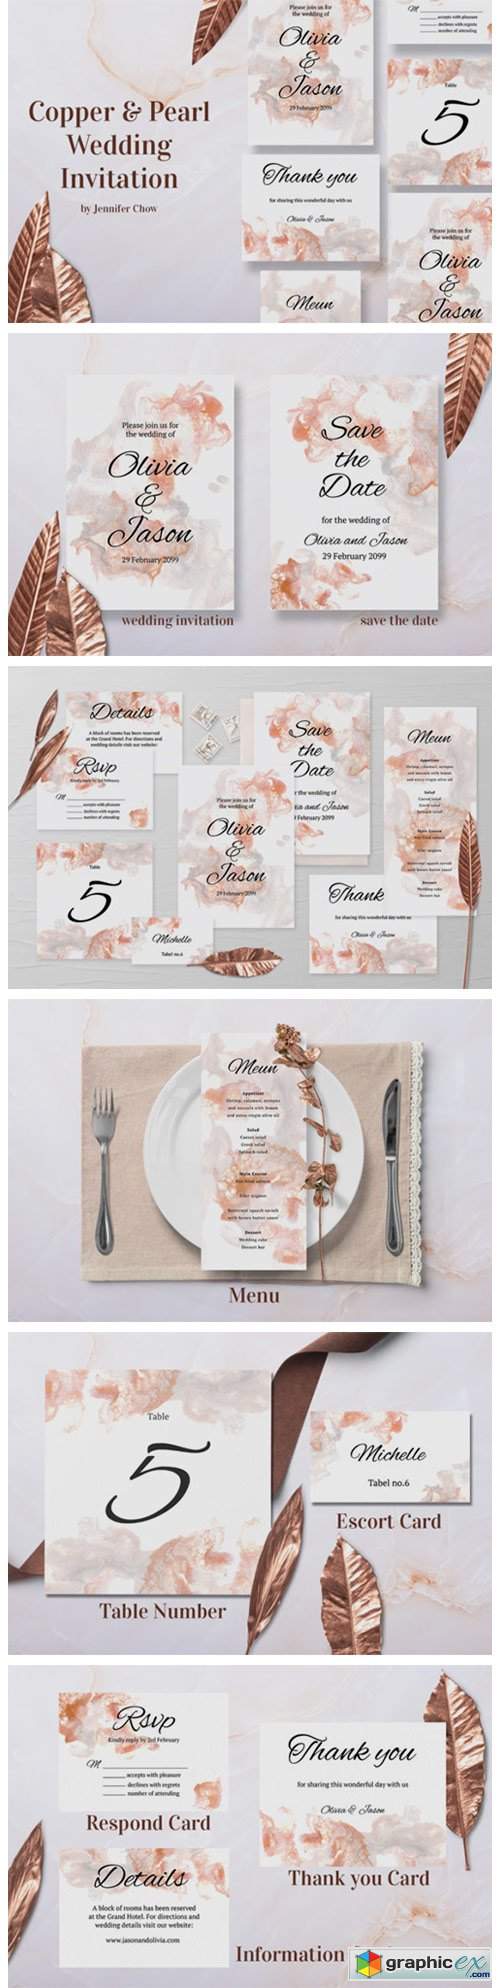 Copper and Pearl Wedding Invitation Suit